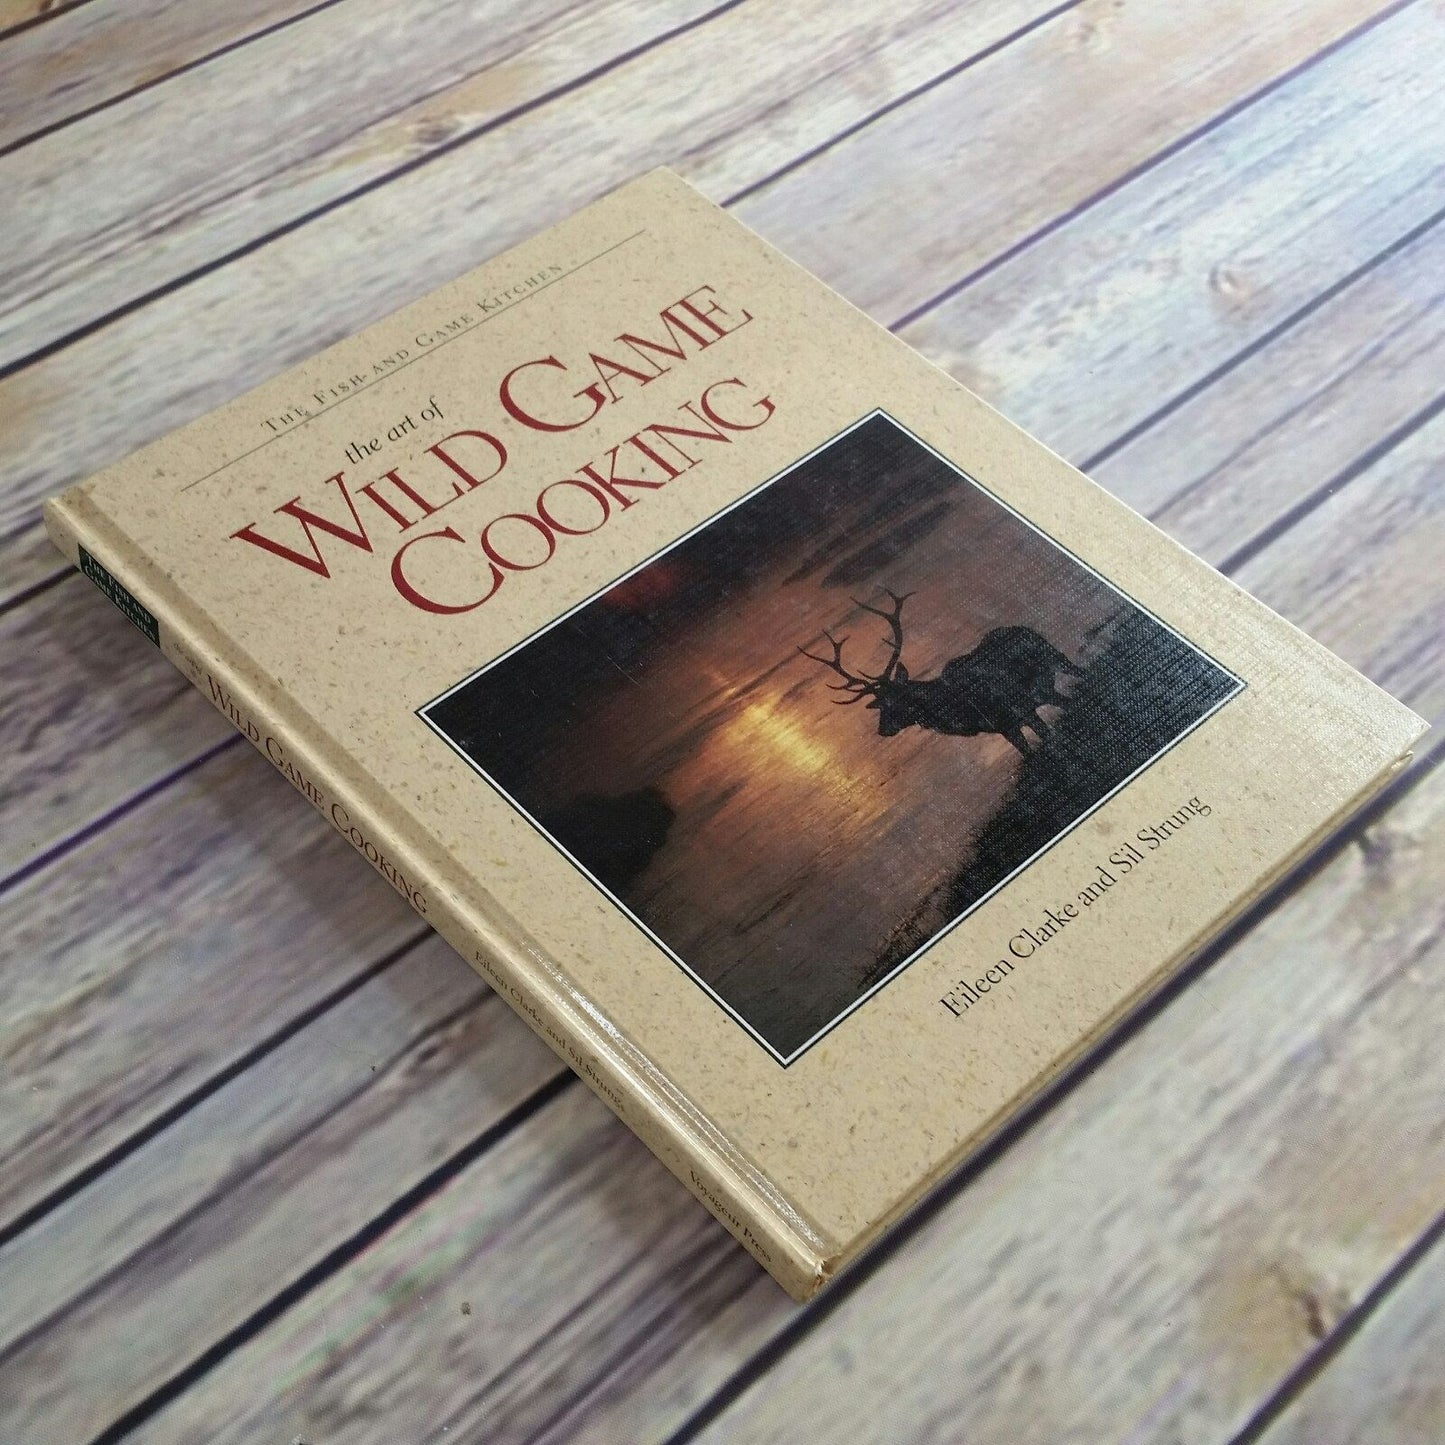 Vintage Cookbook The Art of Wild Game Cooking 1995 Eileen Clarke Sil Strung The Fish and Game Kitchen Hardcover